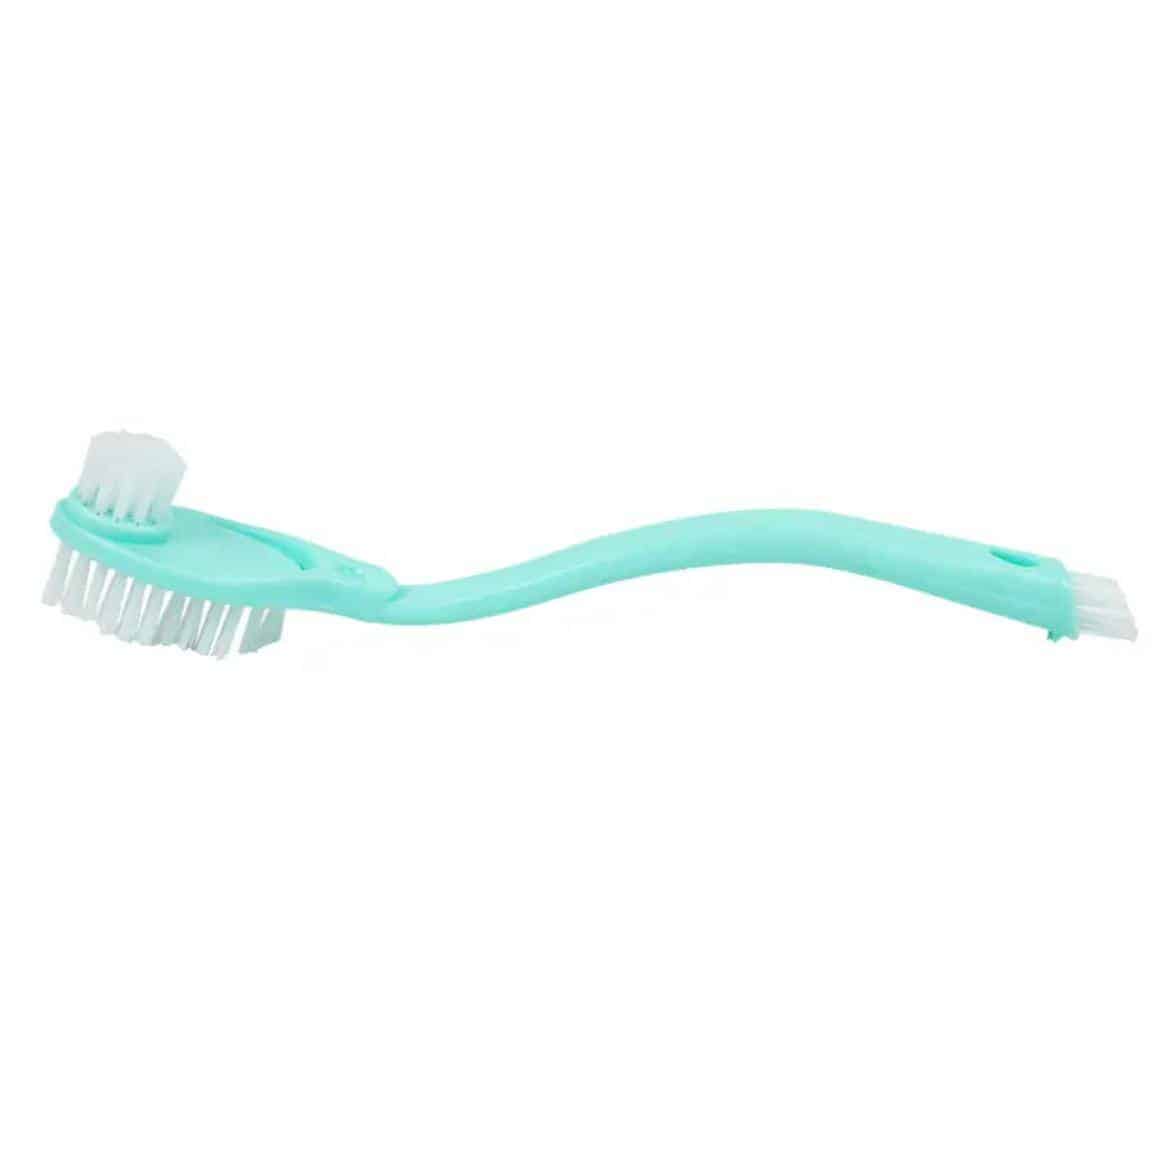 https://ineedaclean.com Shoe Cleaning Brush New Arrivals Cleaning Supplies Cleaning Supplies Under 10 Dollars color: Green  I Need A Clean https://ineedaclean.com/the-clean-store/cleaning-brush-to-wash-shoes/?attribute_color=Green